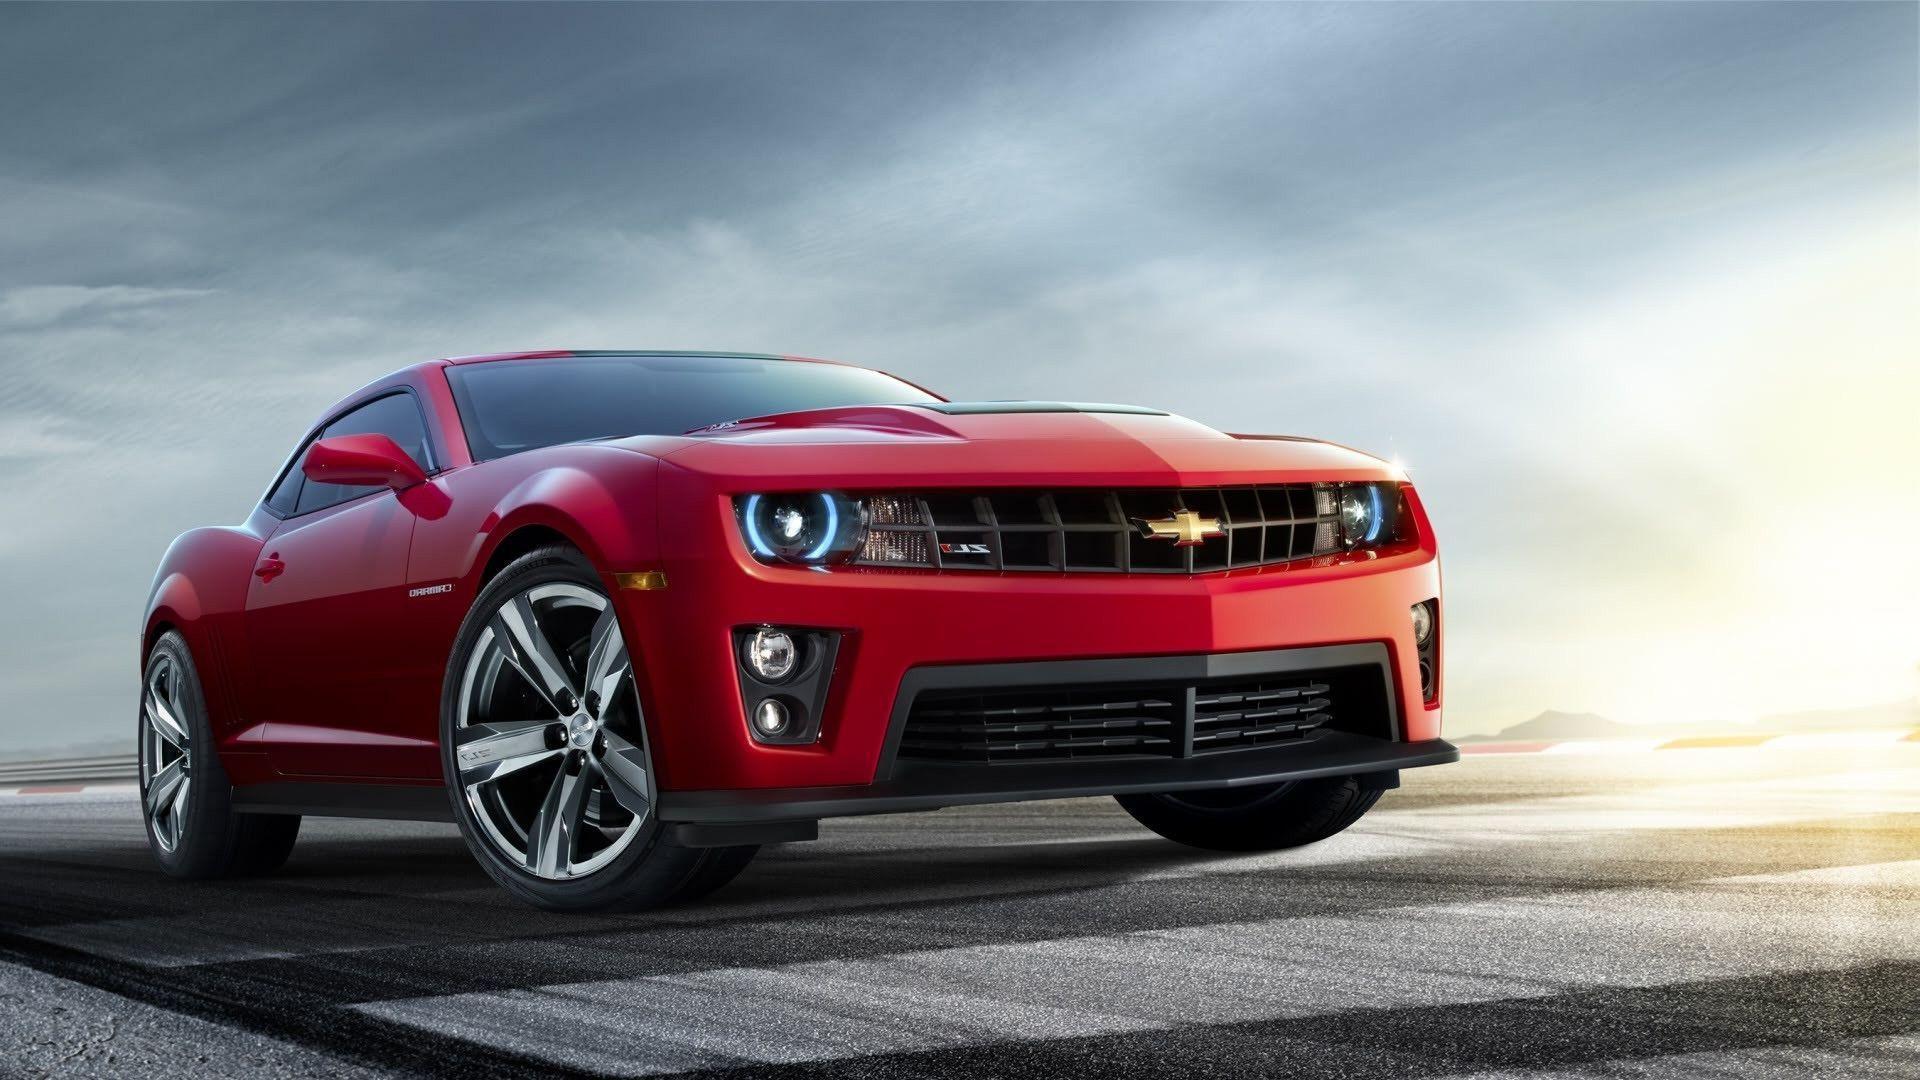 Chevy Camaro Wallpapers - Top Free